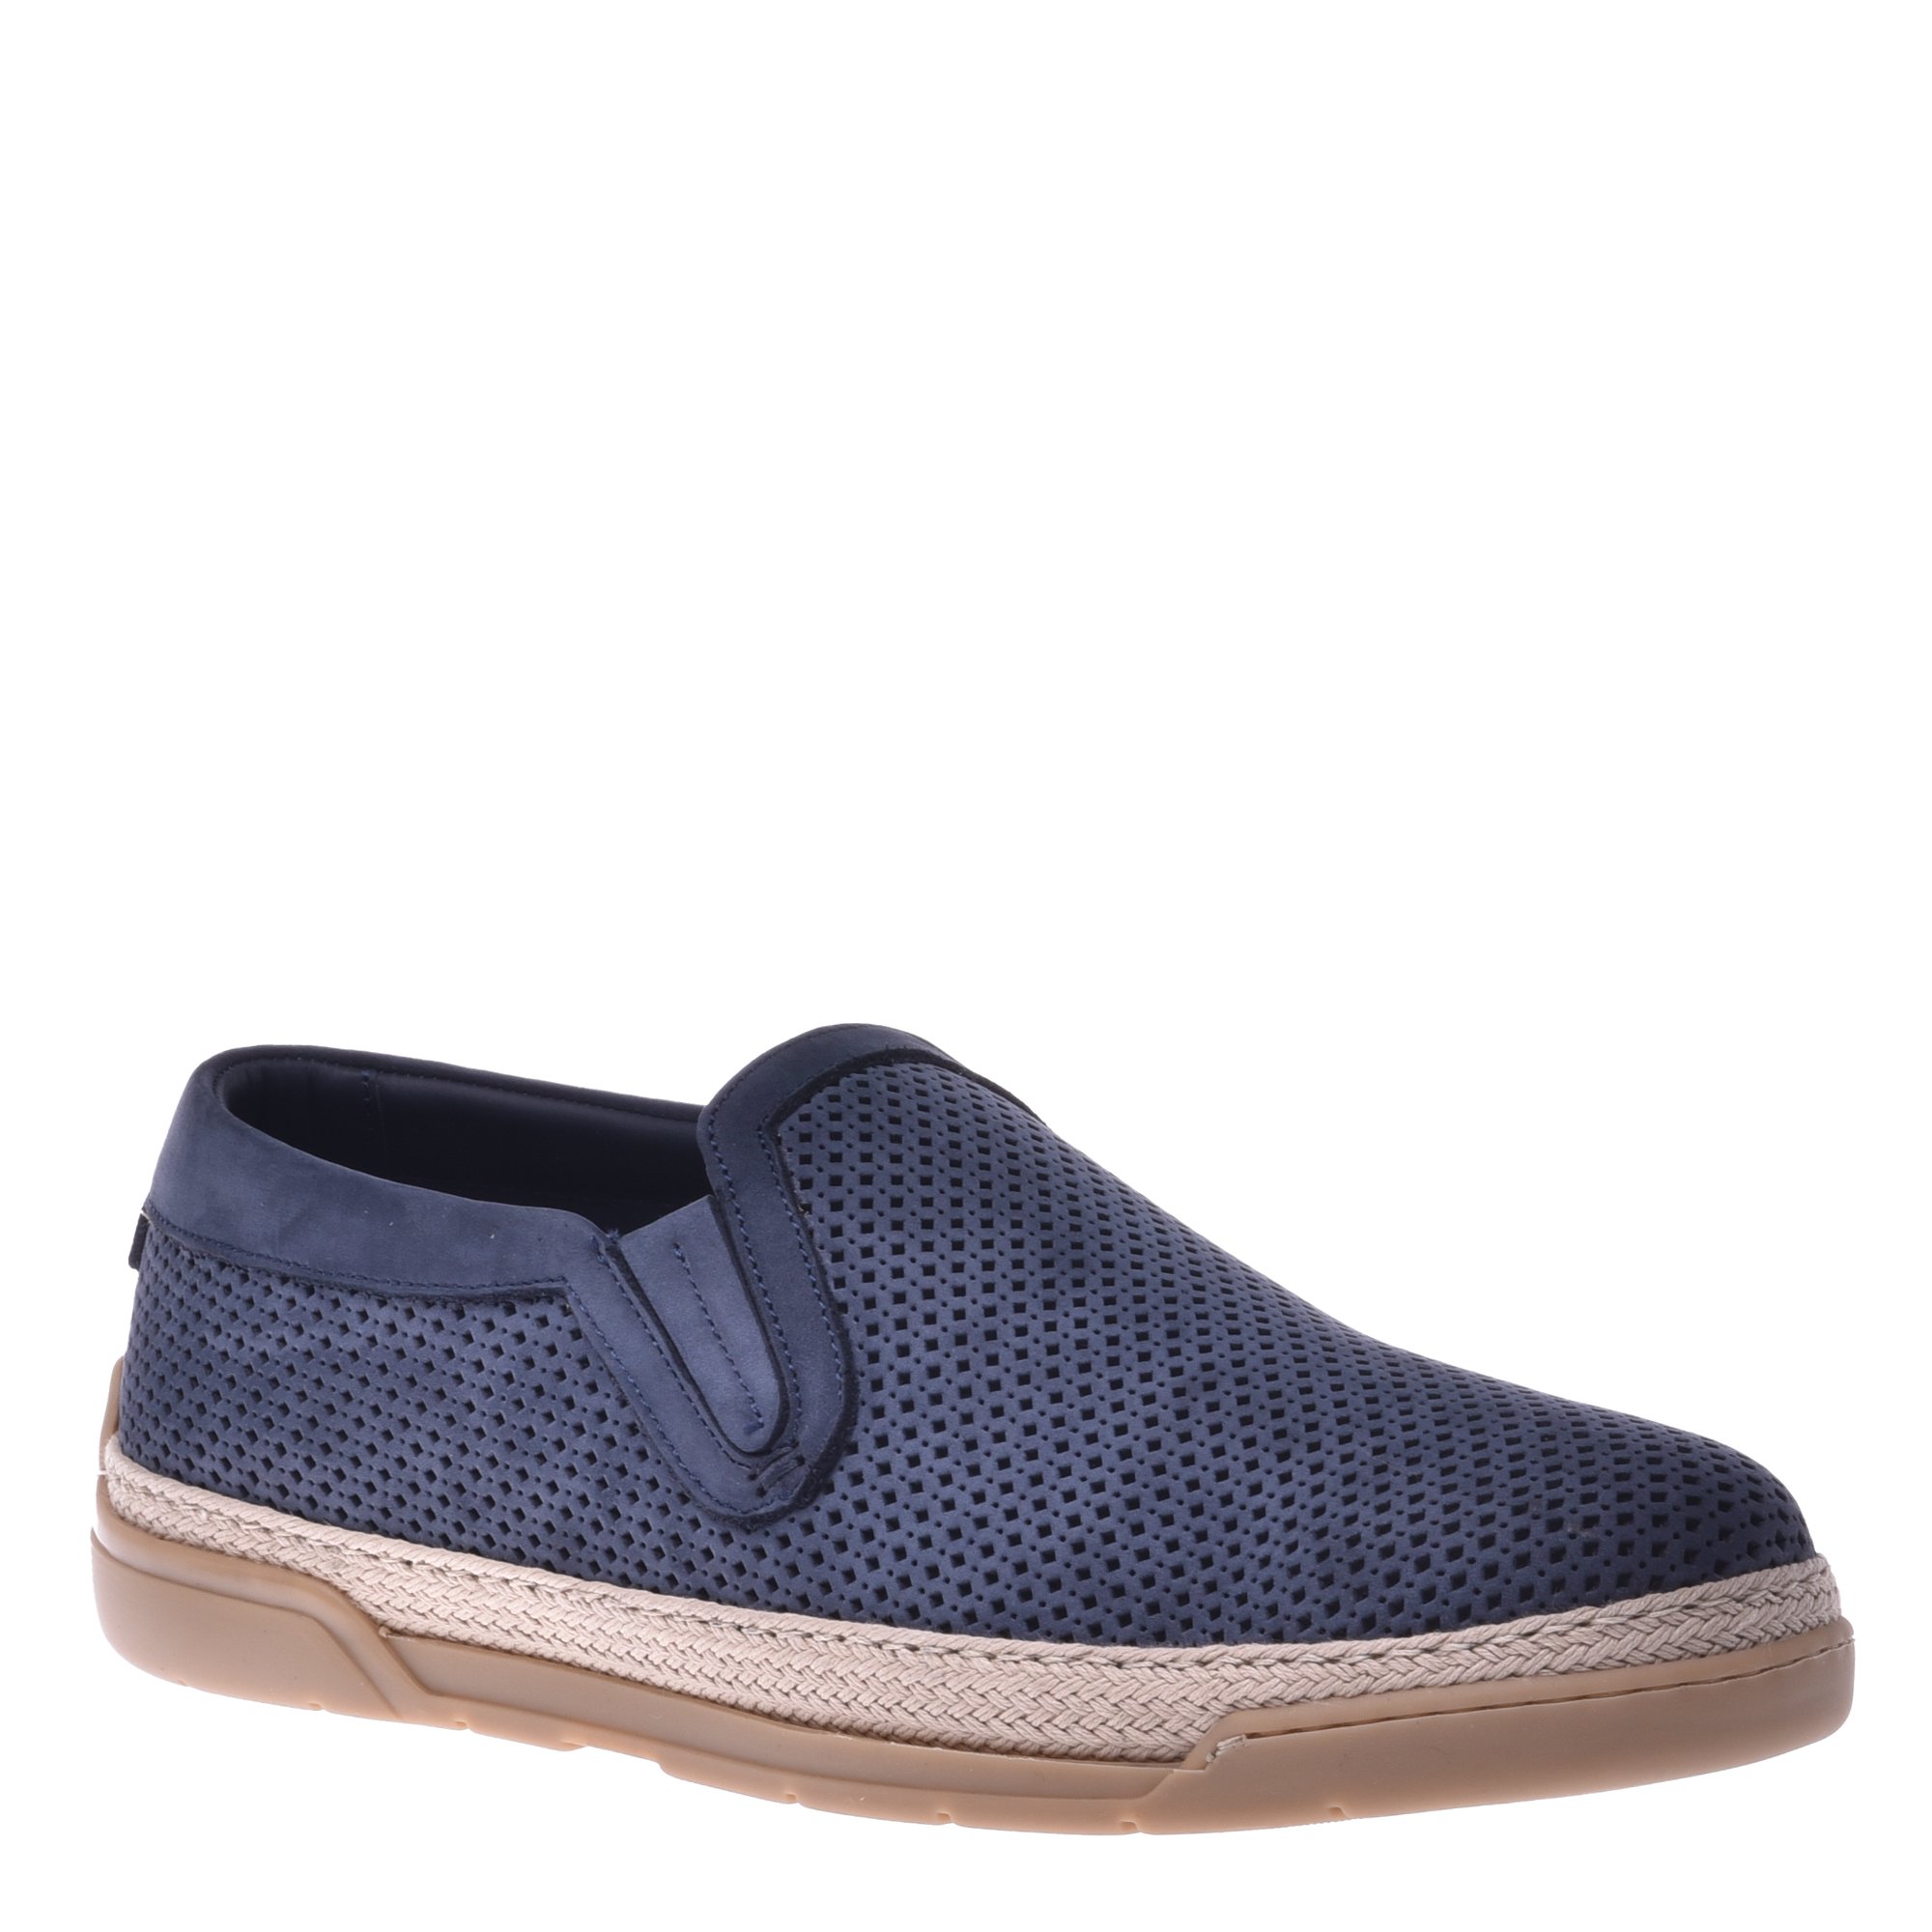 Loafer in dark blue perforated nubuck image